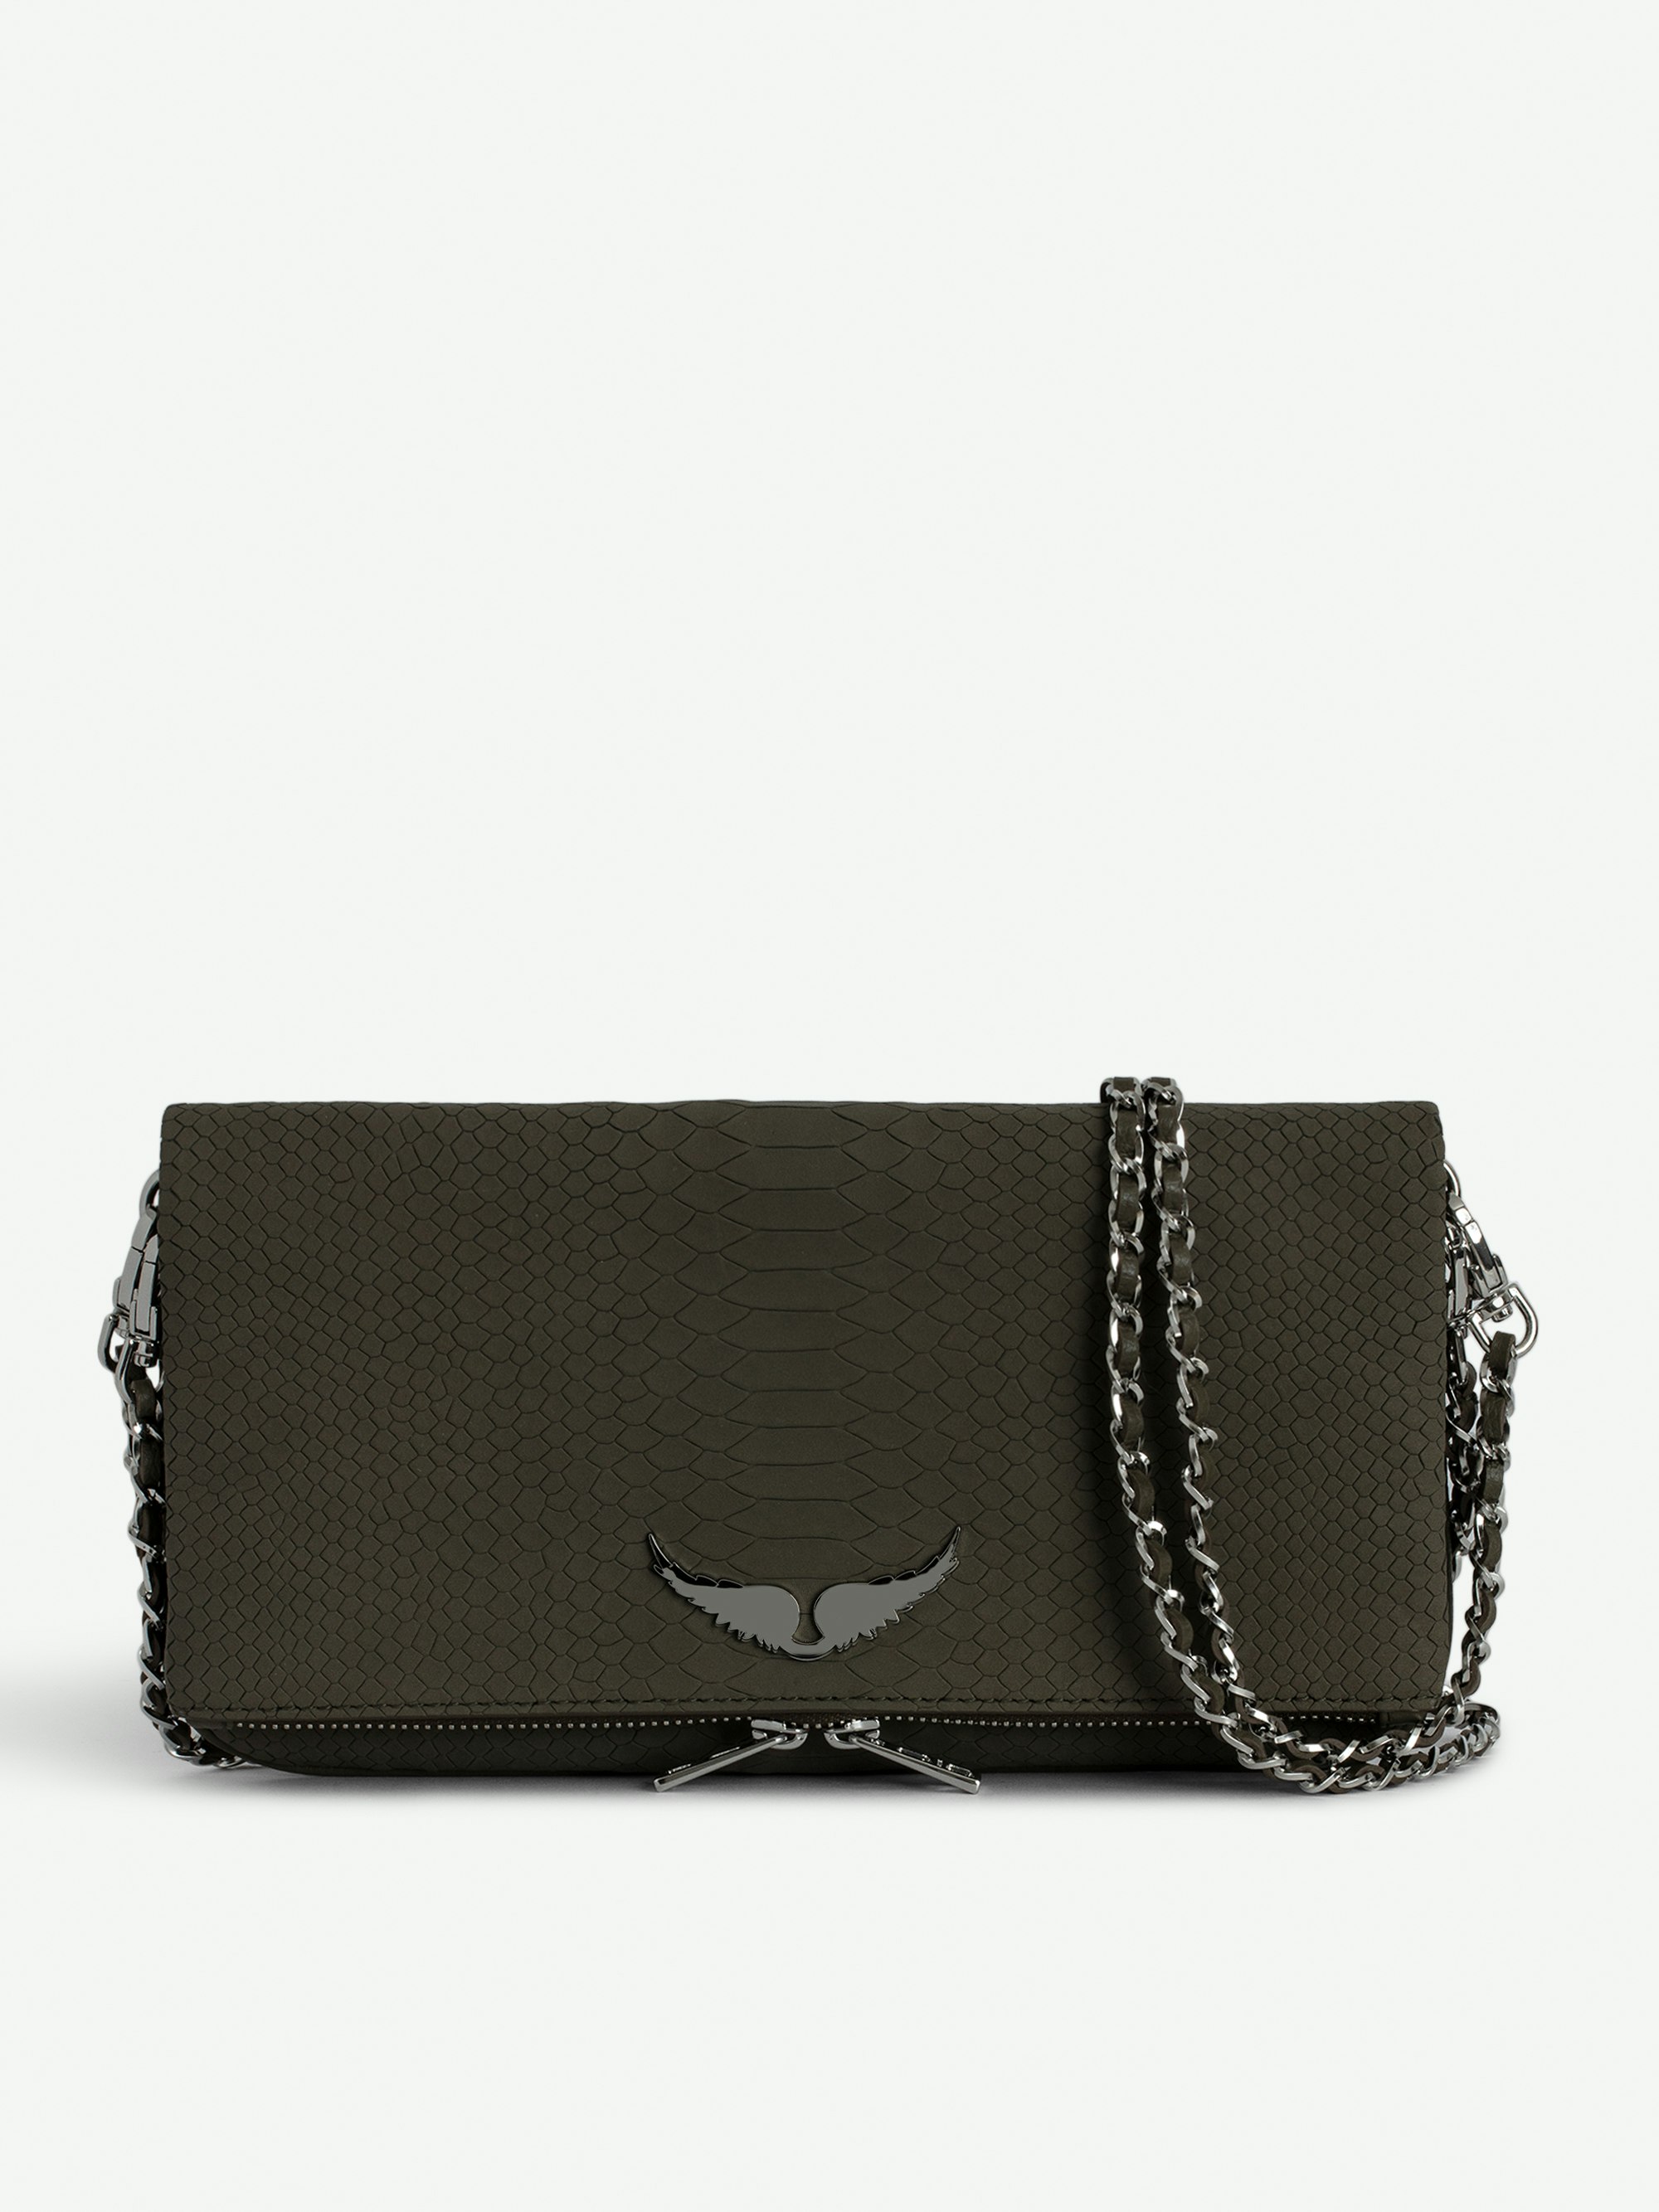 Rock Soft Savage Clutch - Khaki python-effect leather clutch with double leather and metal chain strap.